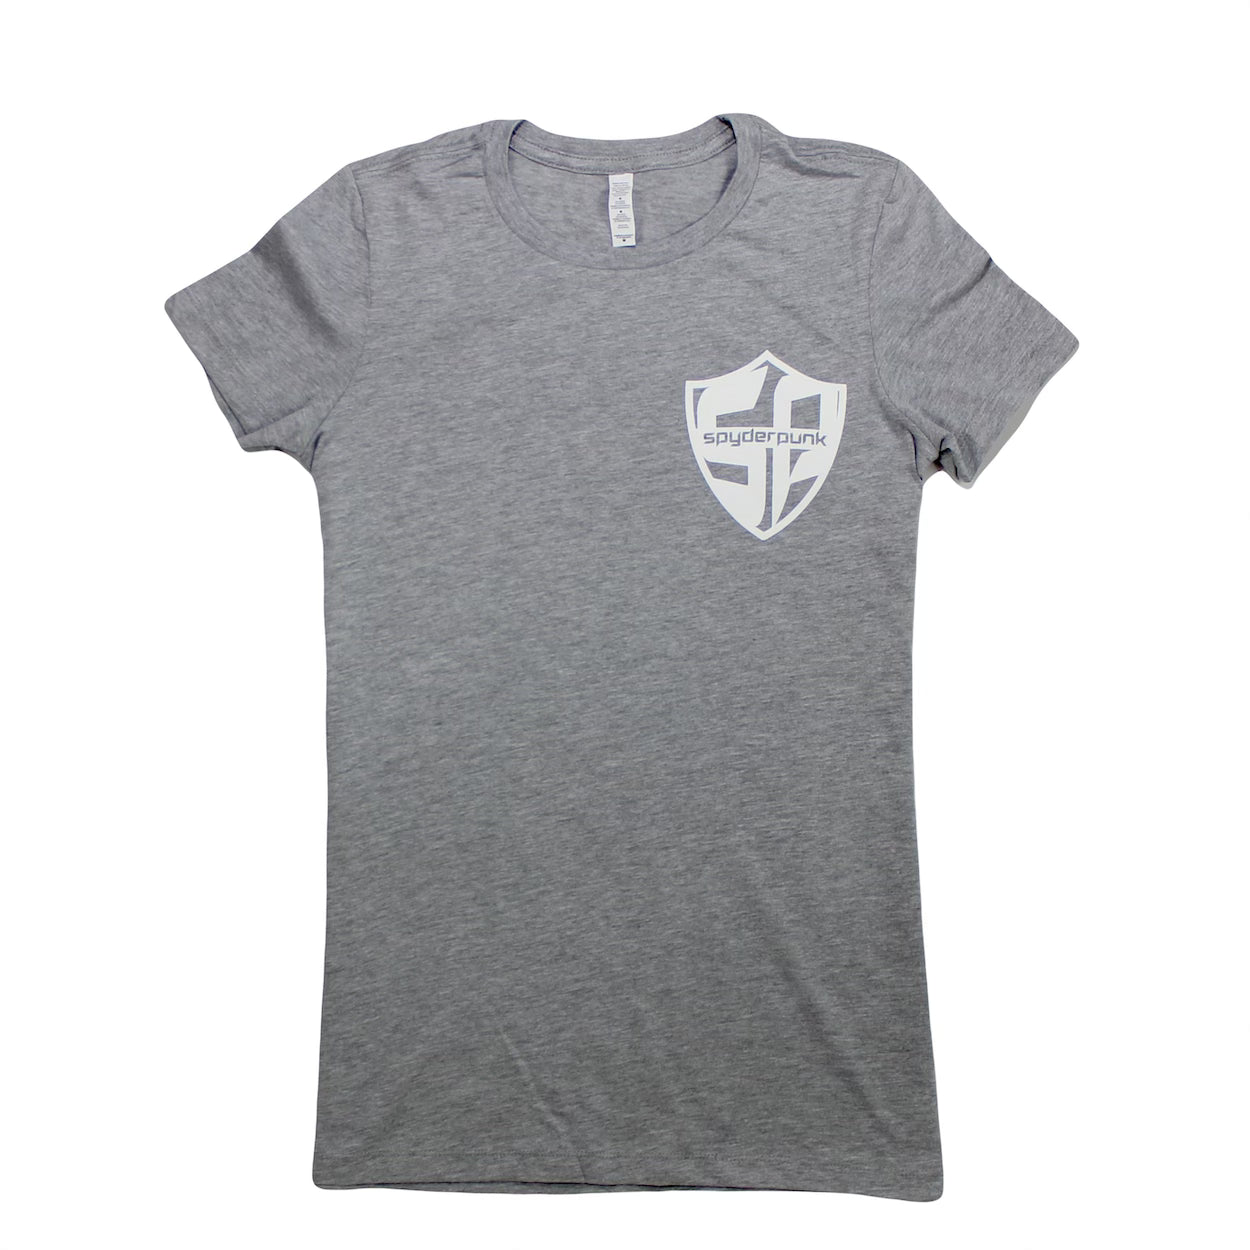 T Shirt Women's Fit With Custom Printed Badge tee In Gray